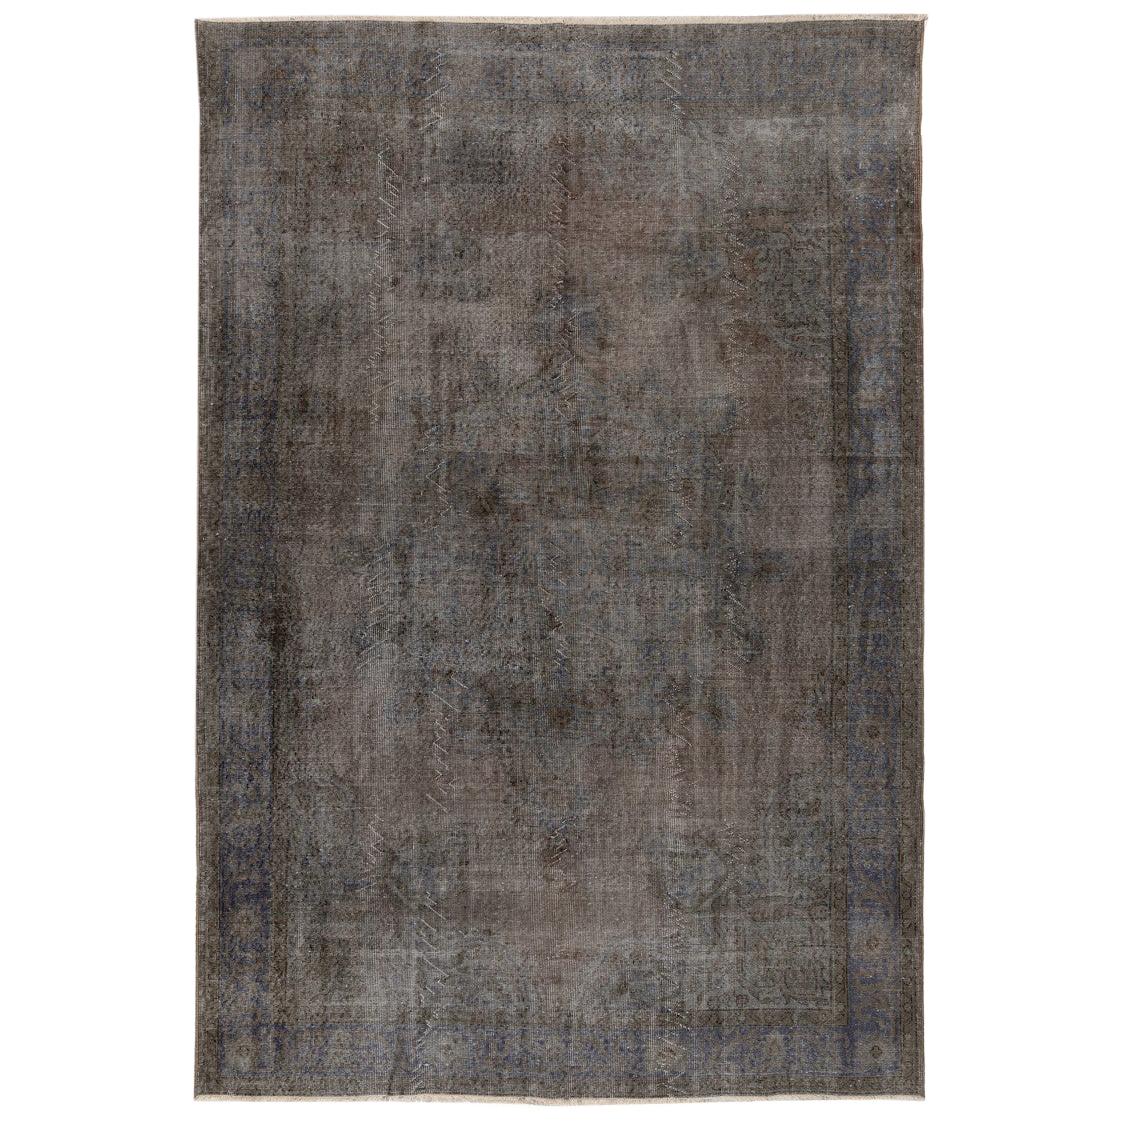 7.4x10.4 Ft Abstract, Distressed Vintage Handmade Rug Over-Dyed in Gray Color